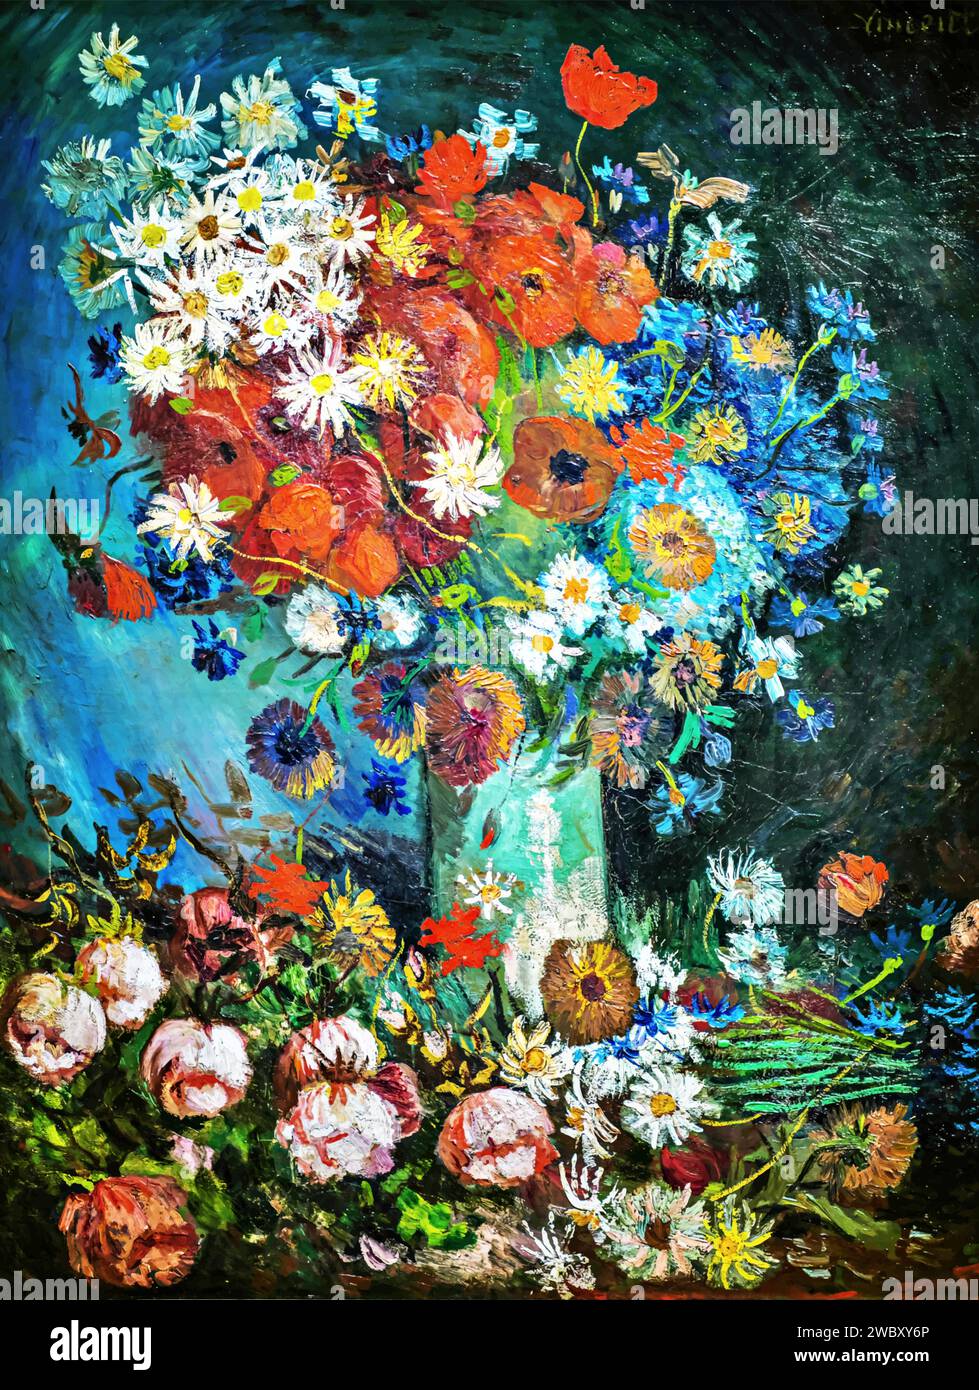 Vase with Cornflowers and Poppies 1887 (Painting) by Artist Gogh, Vincent van (1853-90) Dutch. Stock Vector